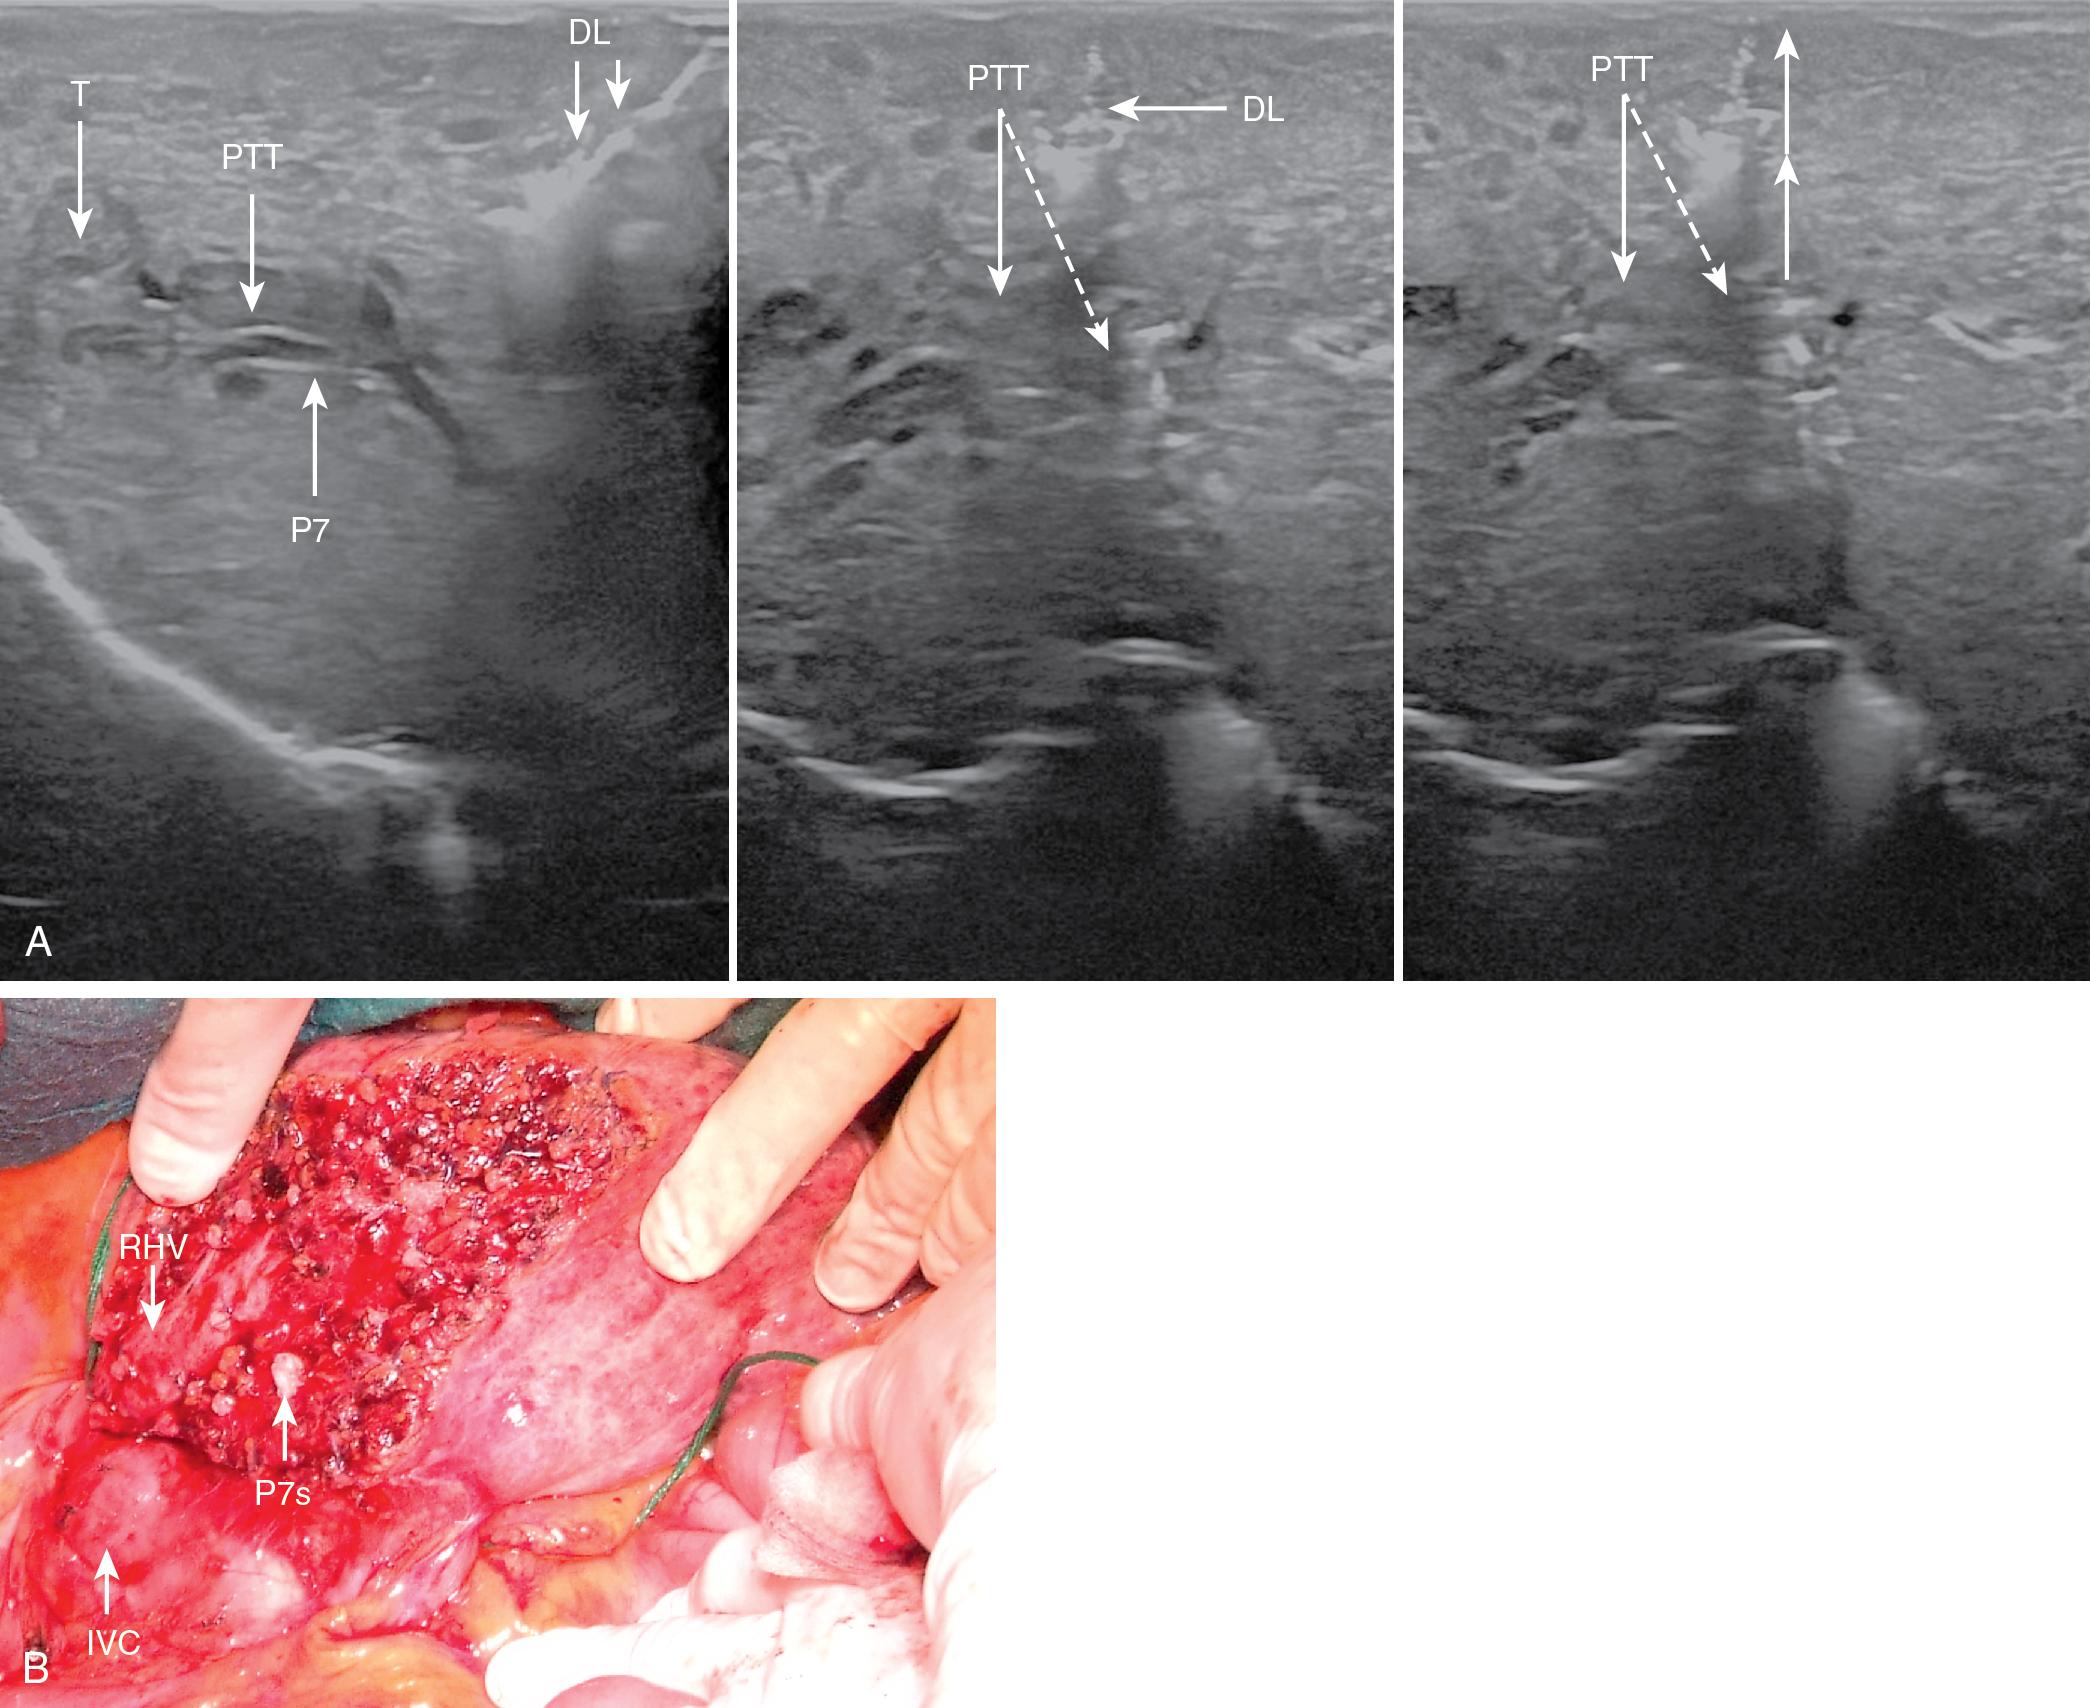 FIGURE 103.38, A, From left to tight, a tumor thrombus (PTT) in the portal branch to segment VII (P7) is visualized at intraoperative ultrasound (IOUS) and progressively reached through the dissection line (DL) ; once P7 has been achieved and encircled with suture, it is pulled up and the level of the encirclement with respect to the PTT is confirmed by the traction (dashed arrows). B, Once the integrity of the PTT is confirmed by the previously shown hooking maneuver, the resection is carried out and at the end the cut surface shows the full exposure of the right hepatic vein (RHV) and the stump of P7 (P7s). IVC , Inferior vena cava; T, tumor.